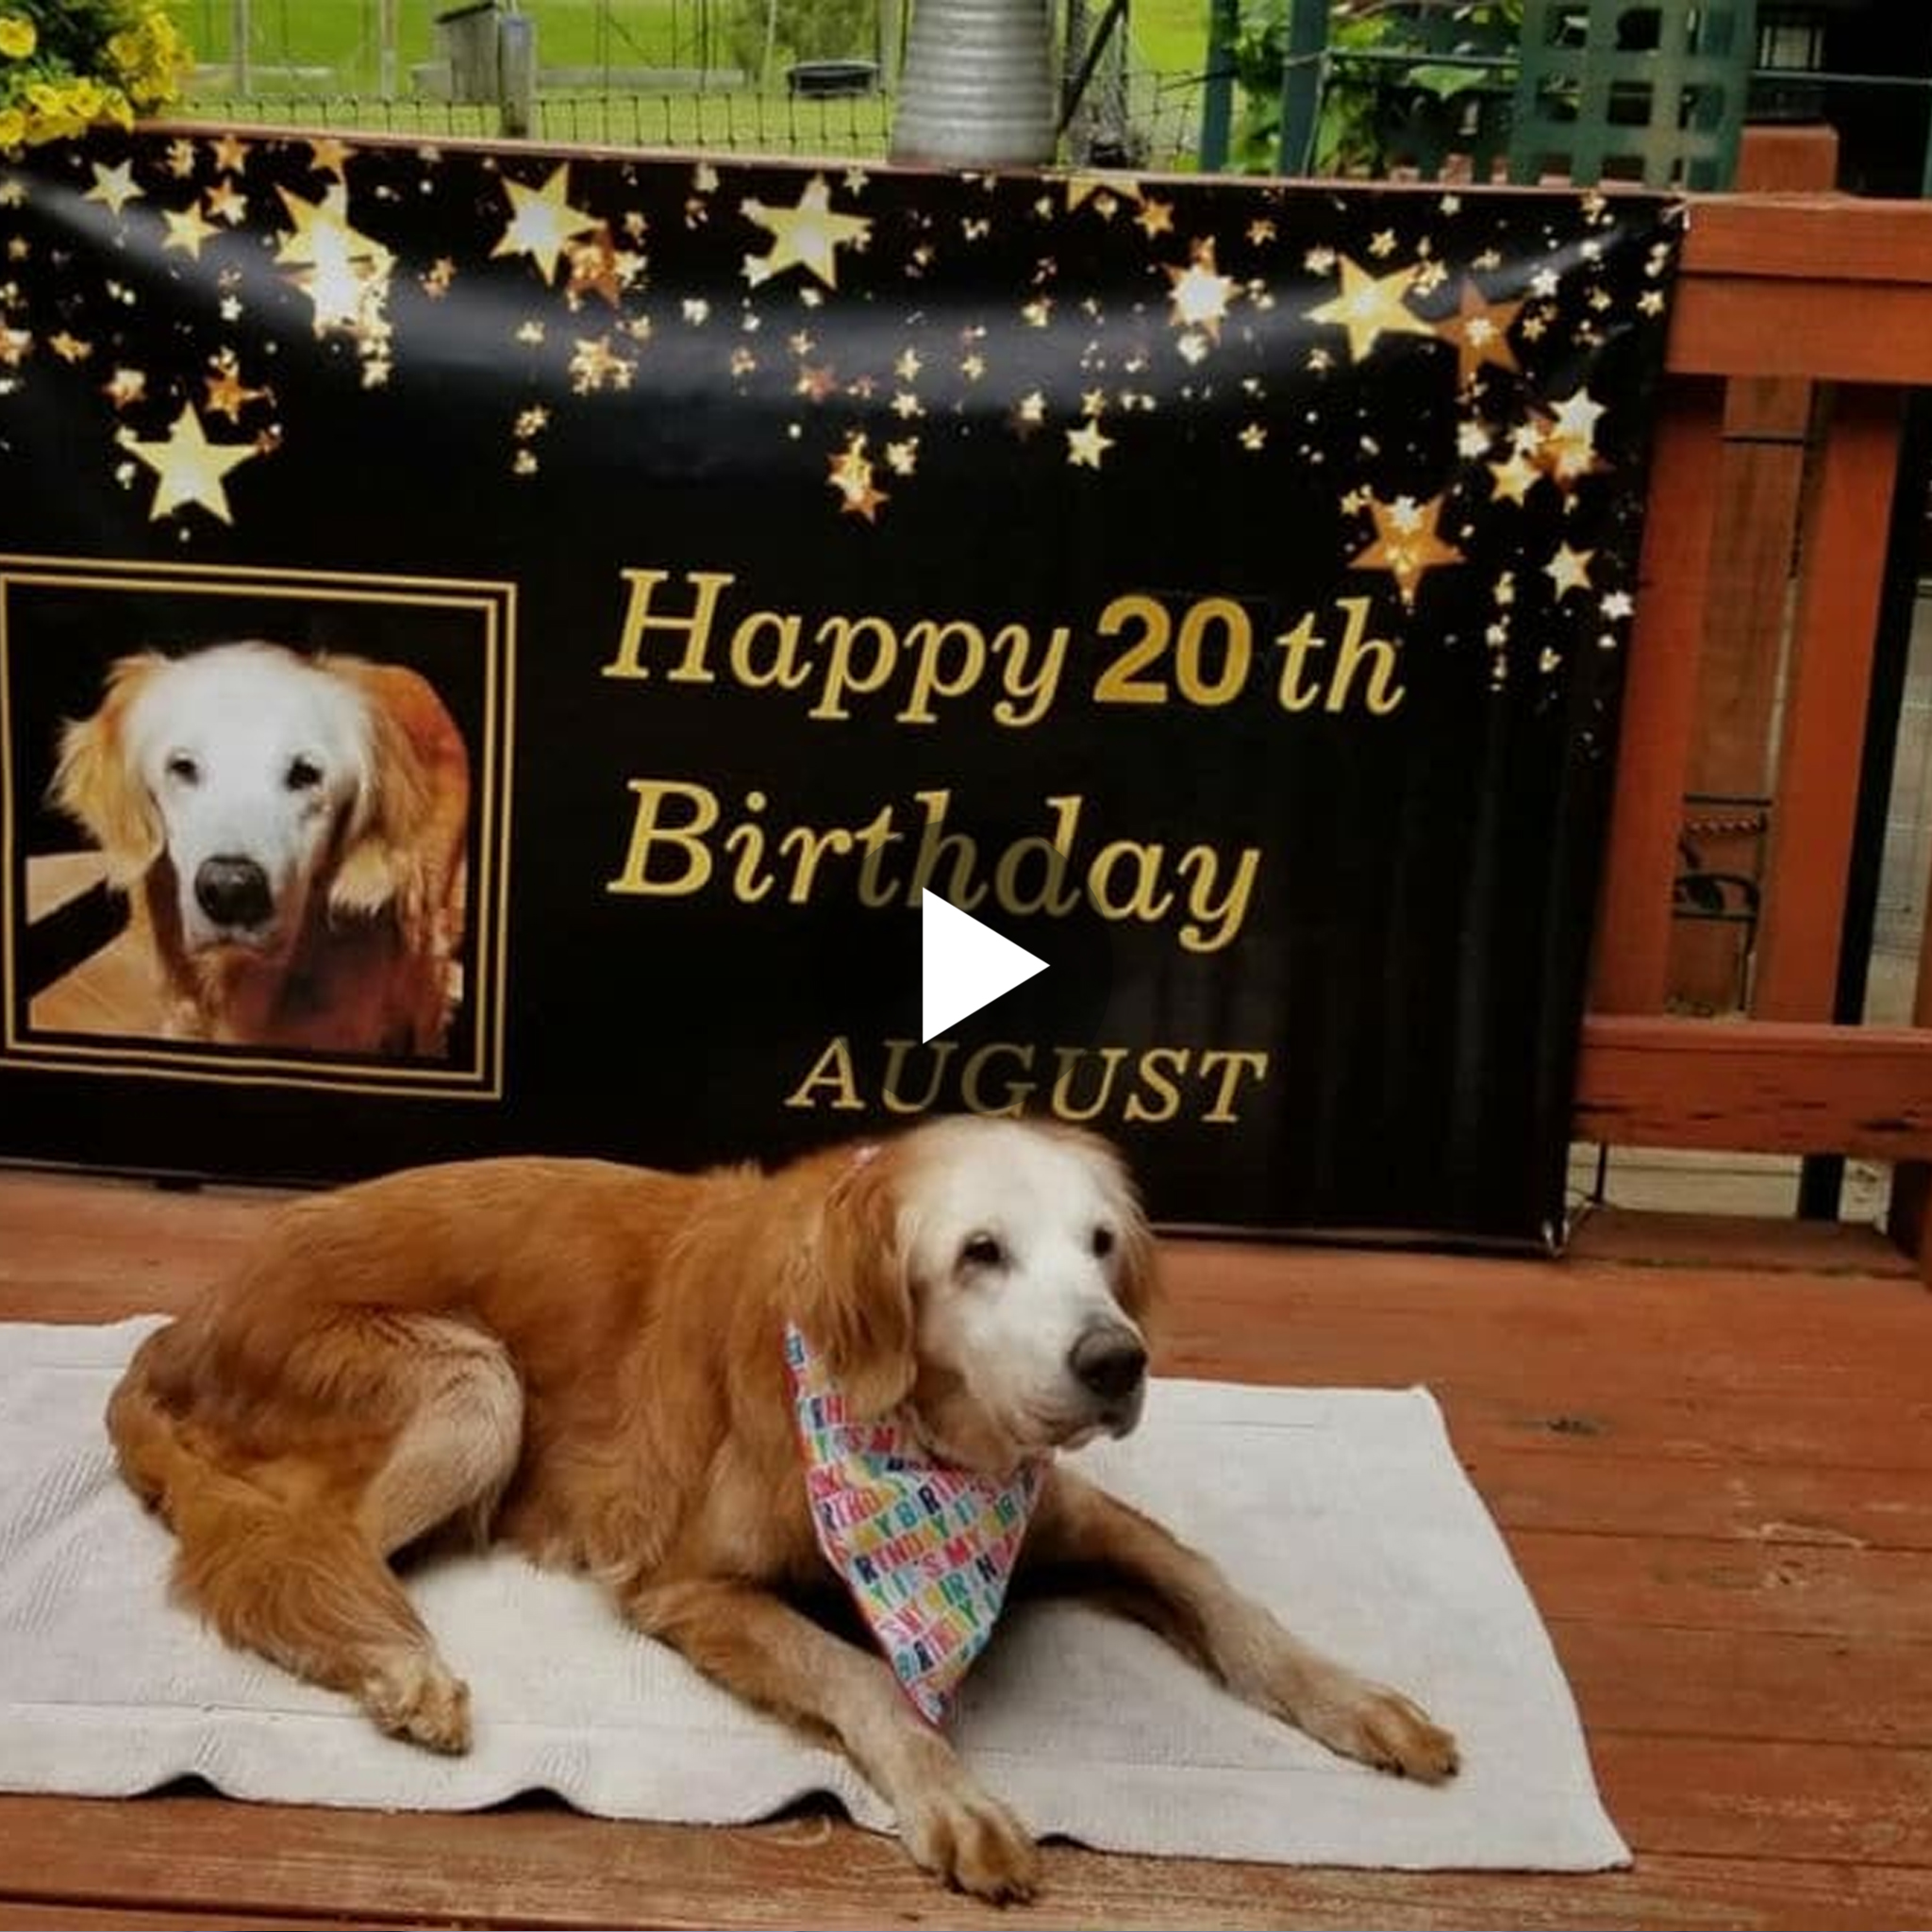 Celebrate the twentieth anniversary of the oldest Golden Retriever in history, based on some reports.